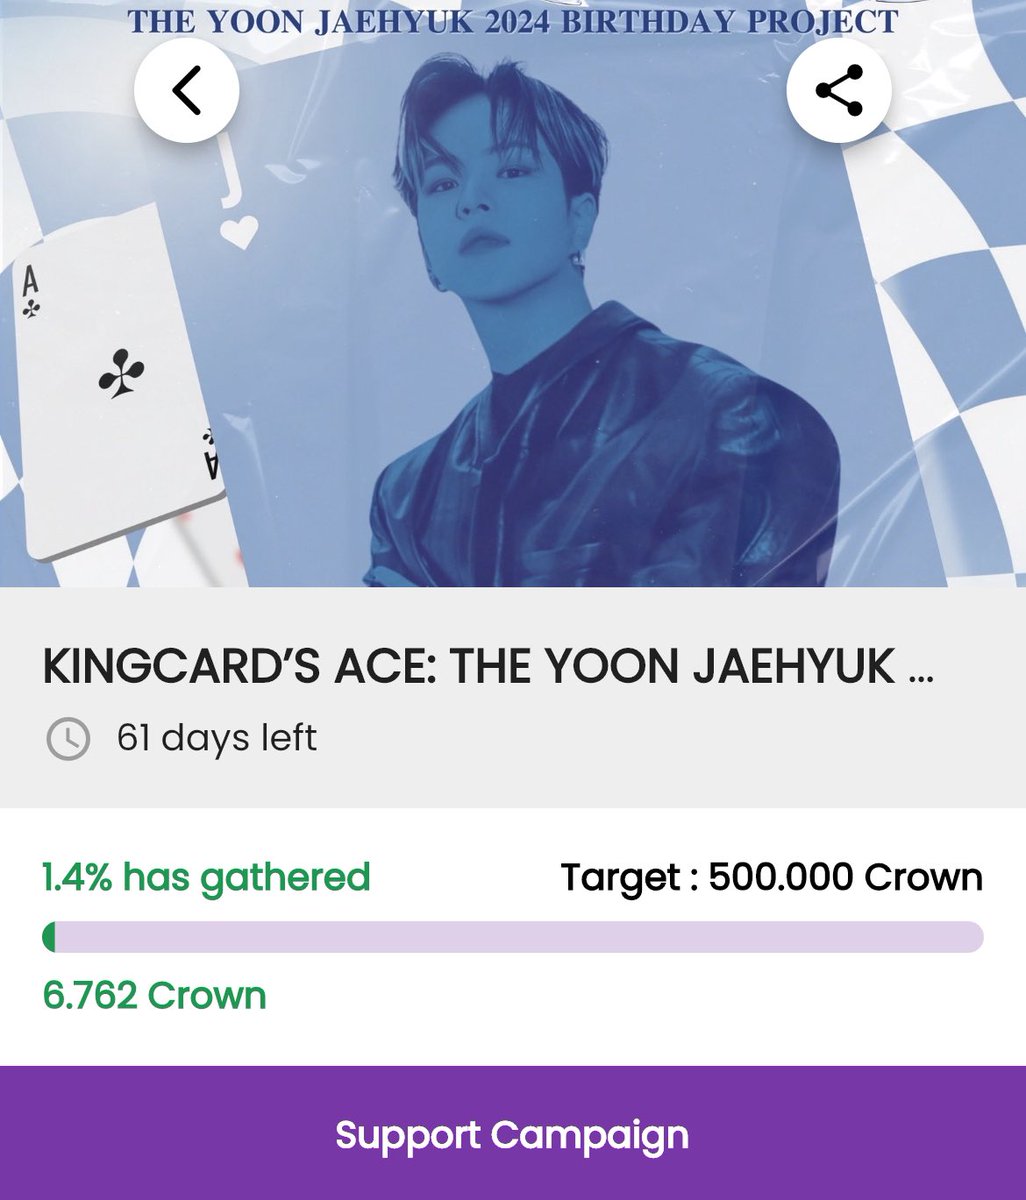 [🗳️] QUEERI FAN SUPPORT 🎯 6.762/500000 crowns 61 DAYS LEFT! You may watch ads and convert it to gold crowns or donate any amount to our @YJFSFunds! Let’s reach our goals for Jaehyuk. ALL IN FOR JAEHYUK #YOONJAEHYUK #윤재혁 #ユンジェヒョク @treasuremembers